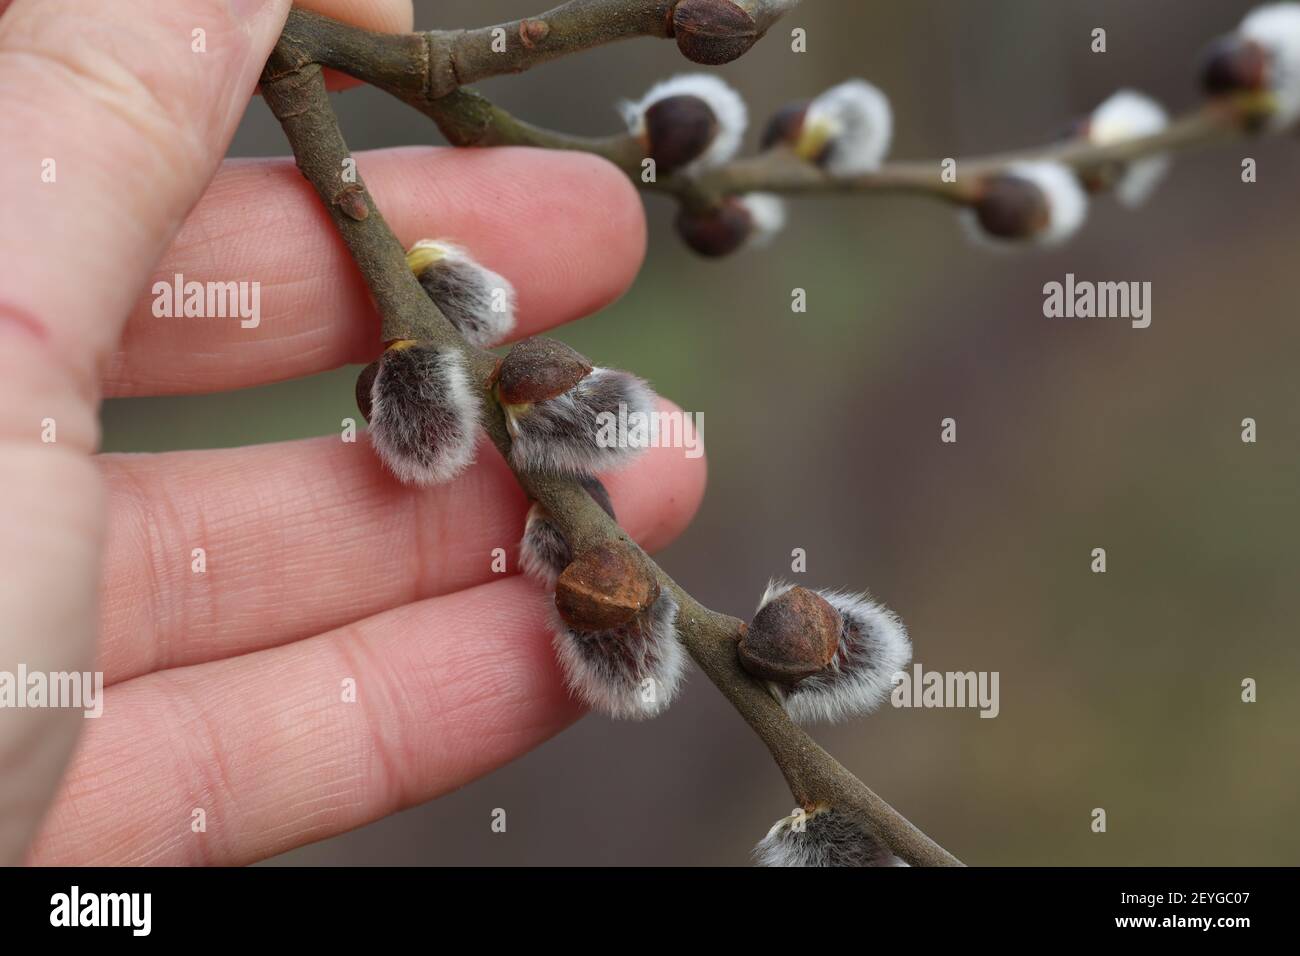 Spring. A hand holding a willow branch Stock Photo